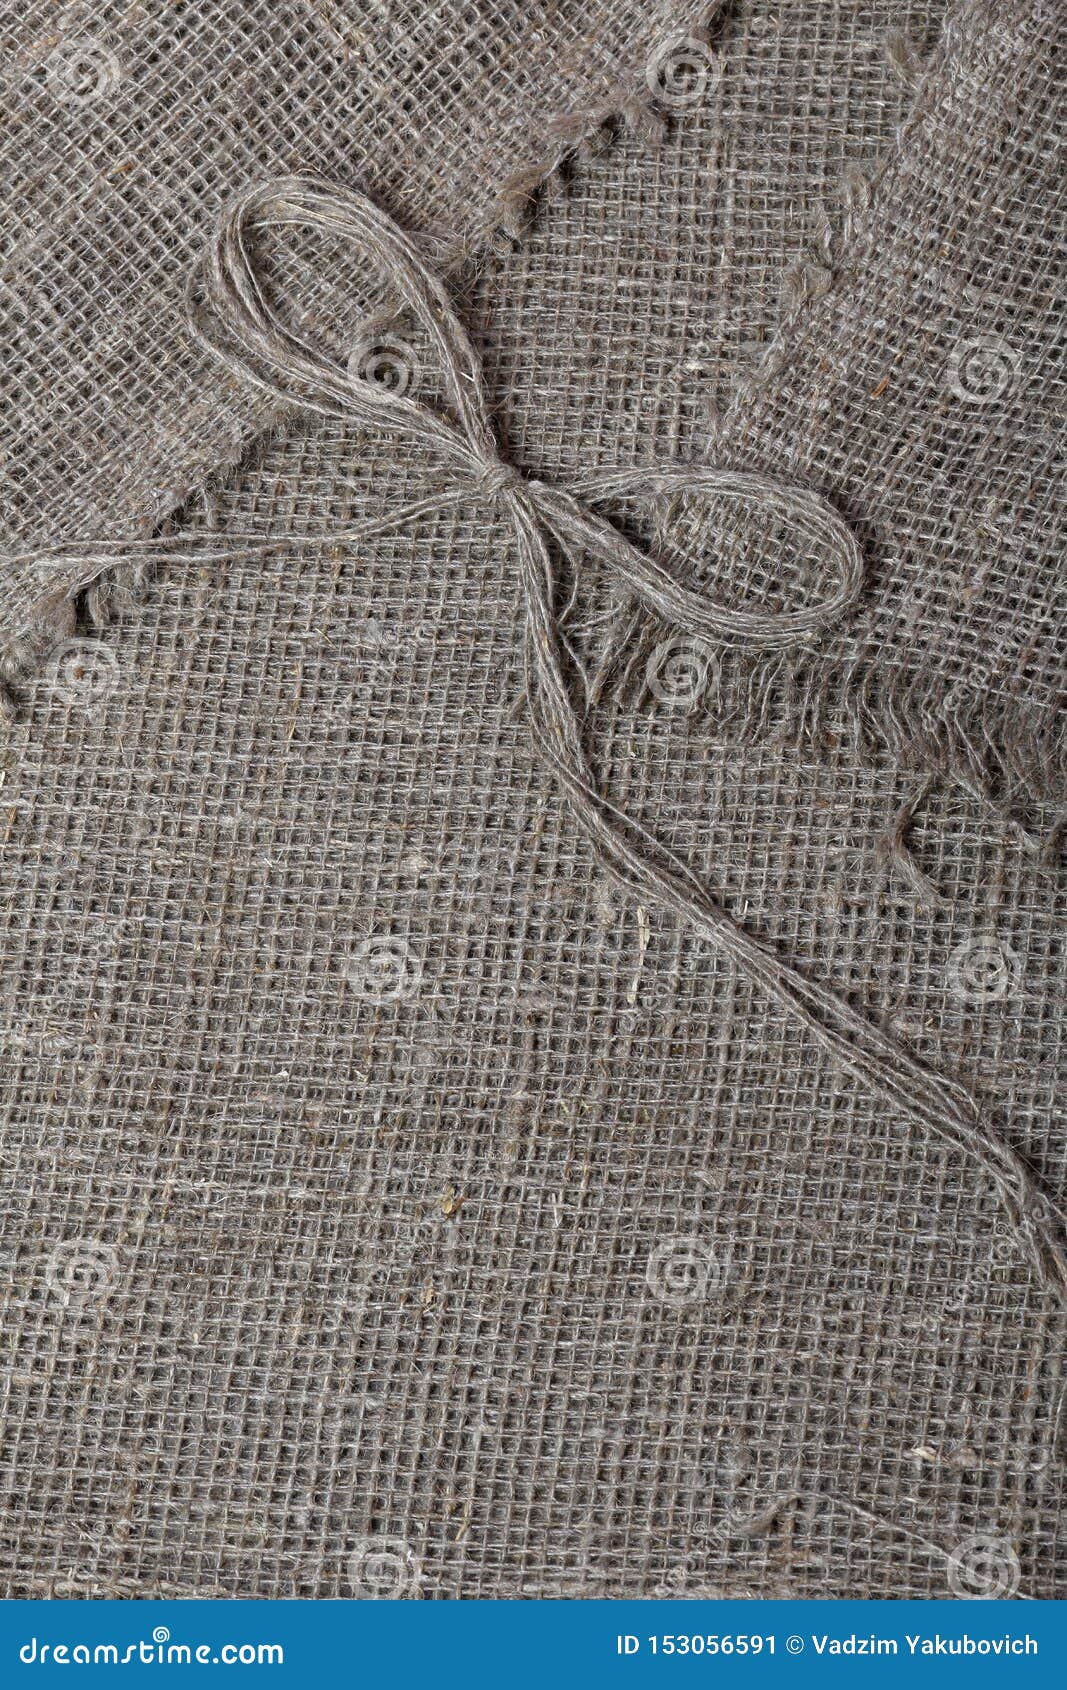 Coarse Linen Fabric. on it Lies a Bow of Linen Thread Stock Image ...